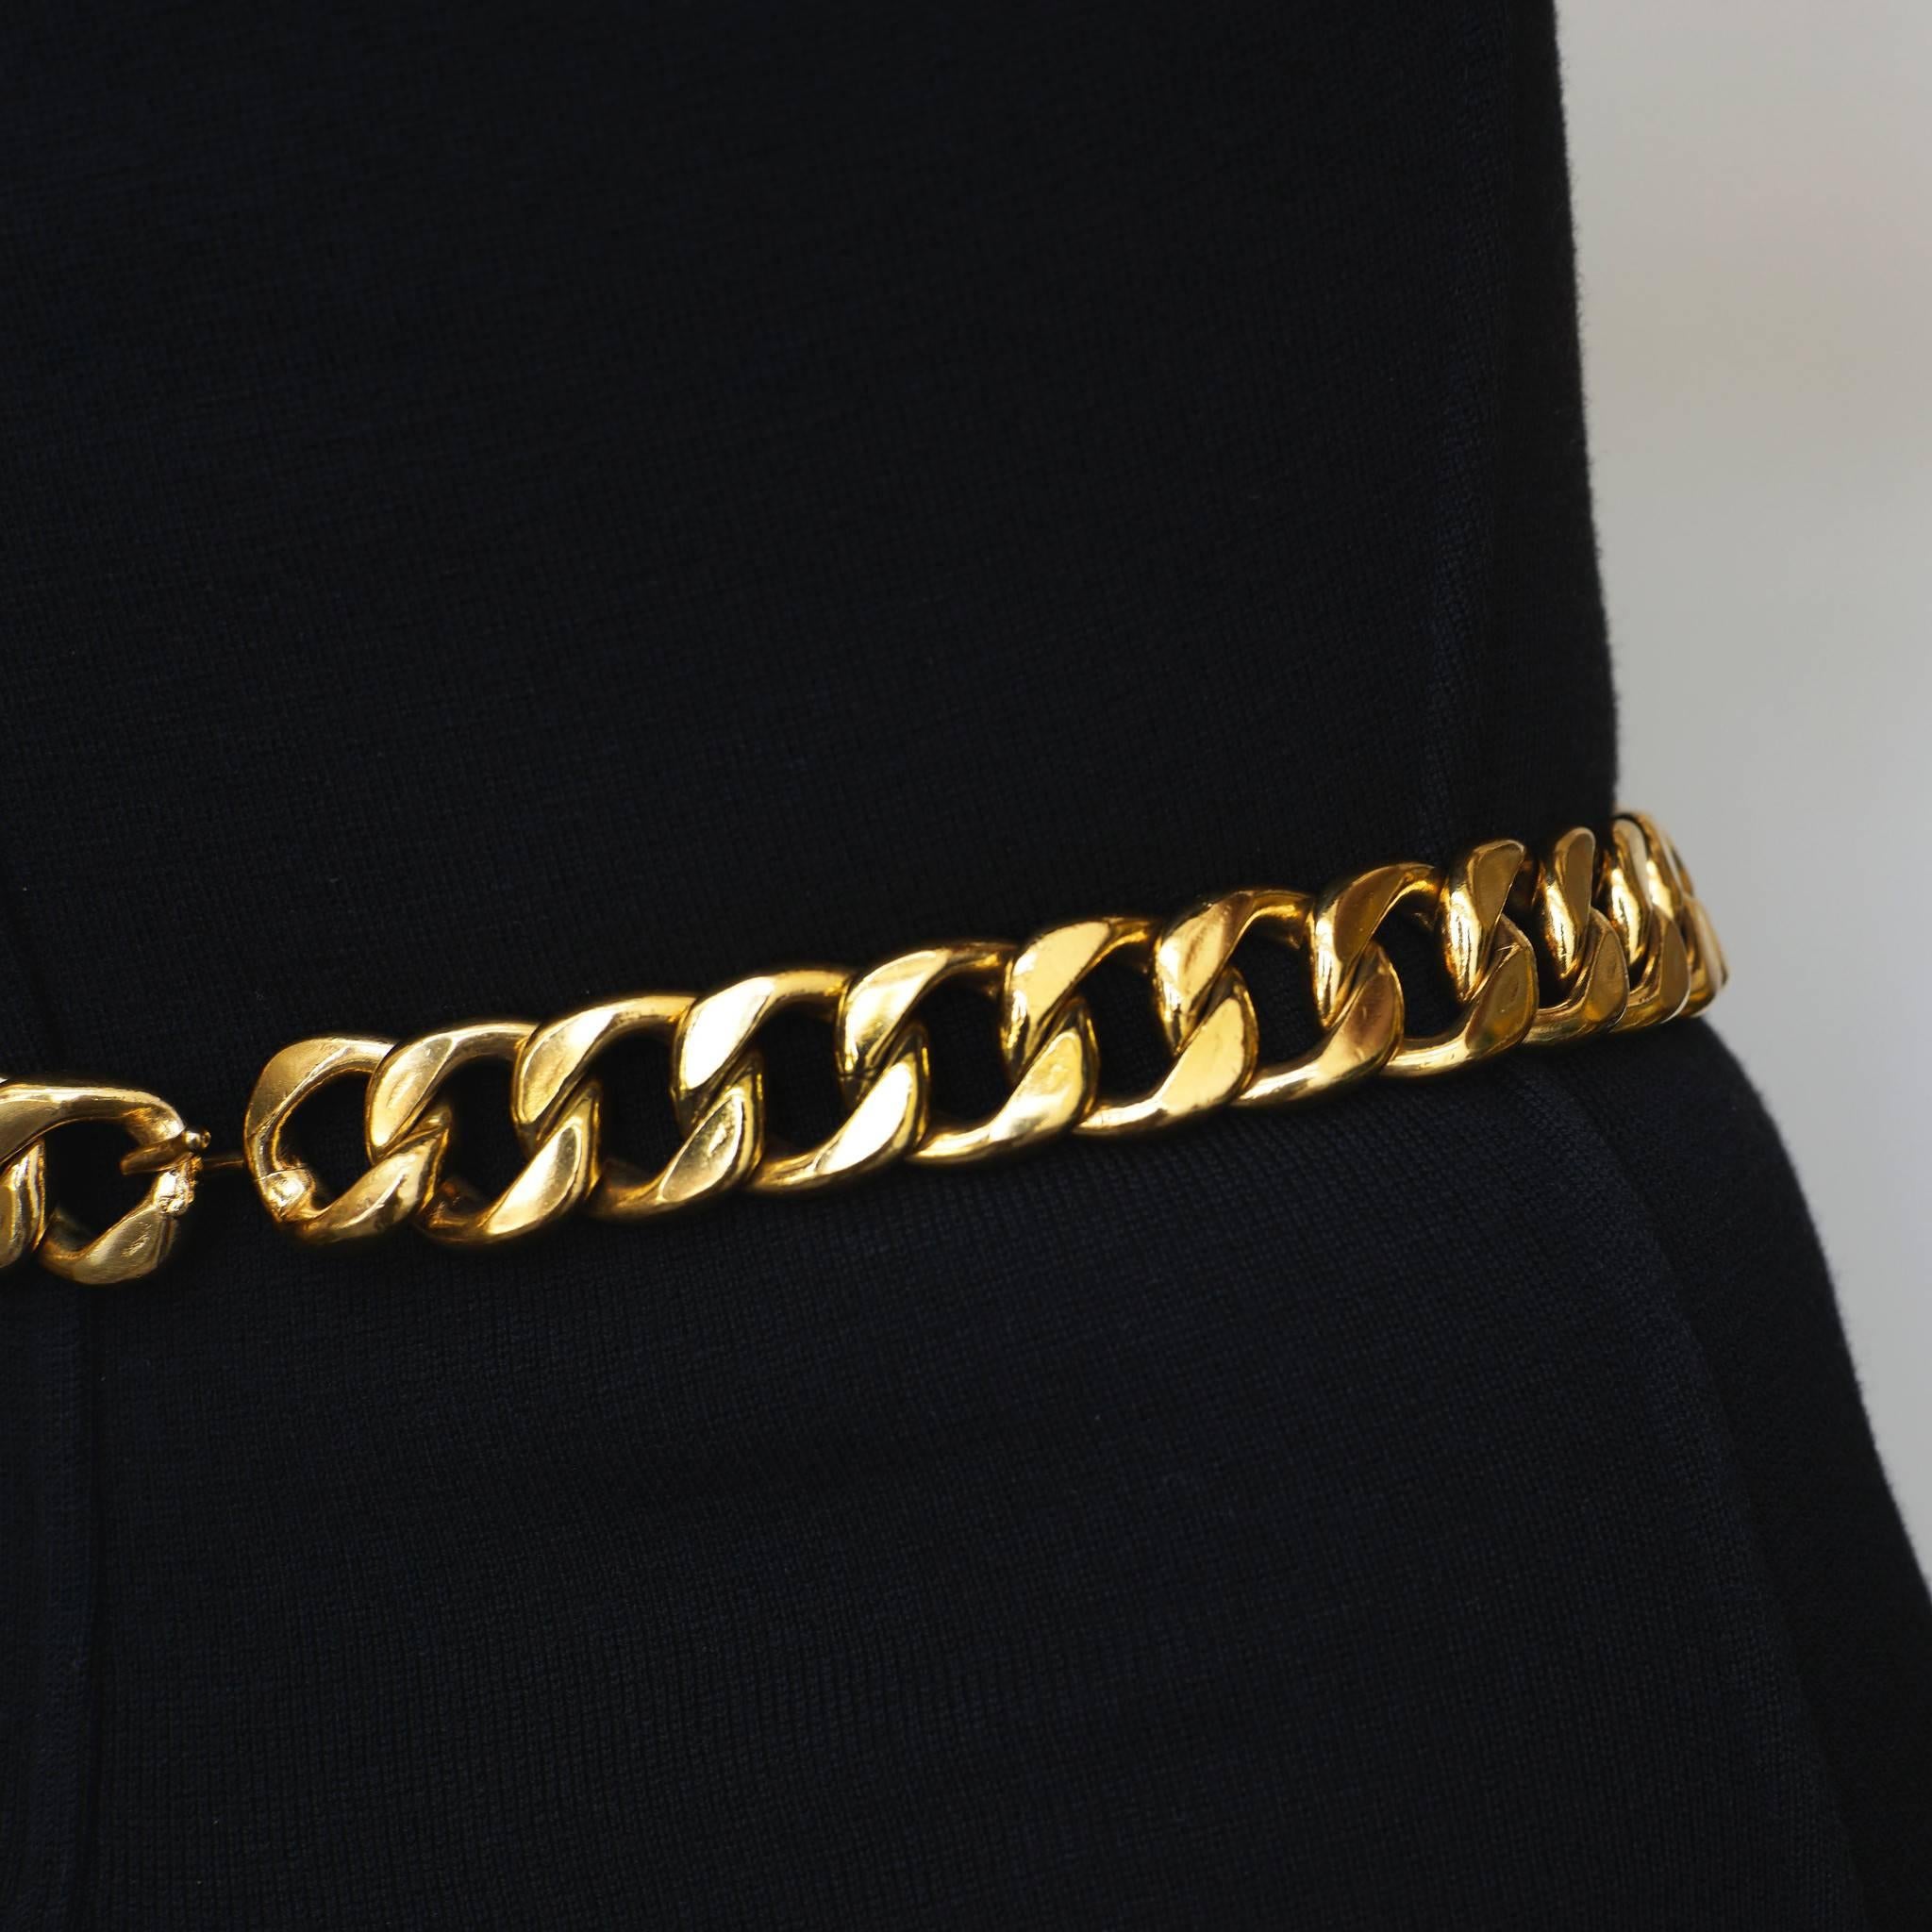 Chanel ID belt with goldtone plated chain and center Channel Logo ID tag. 

-Measurements-
Length: 27.5"
Thickness: 3/4"

Fair Vintage Condition:Please remember all clothes are previously owned.